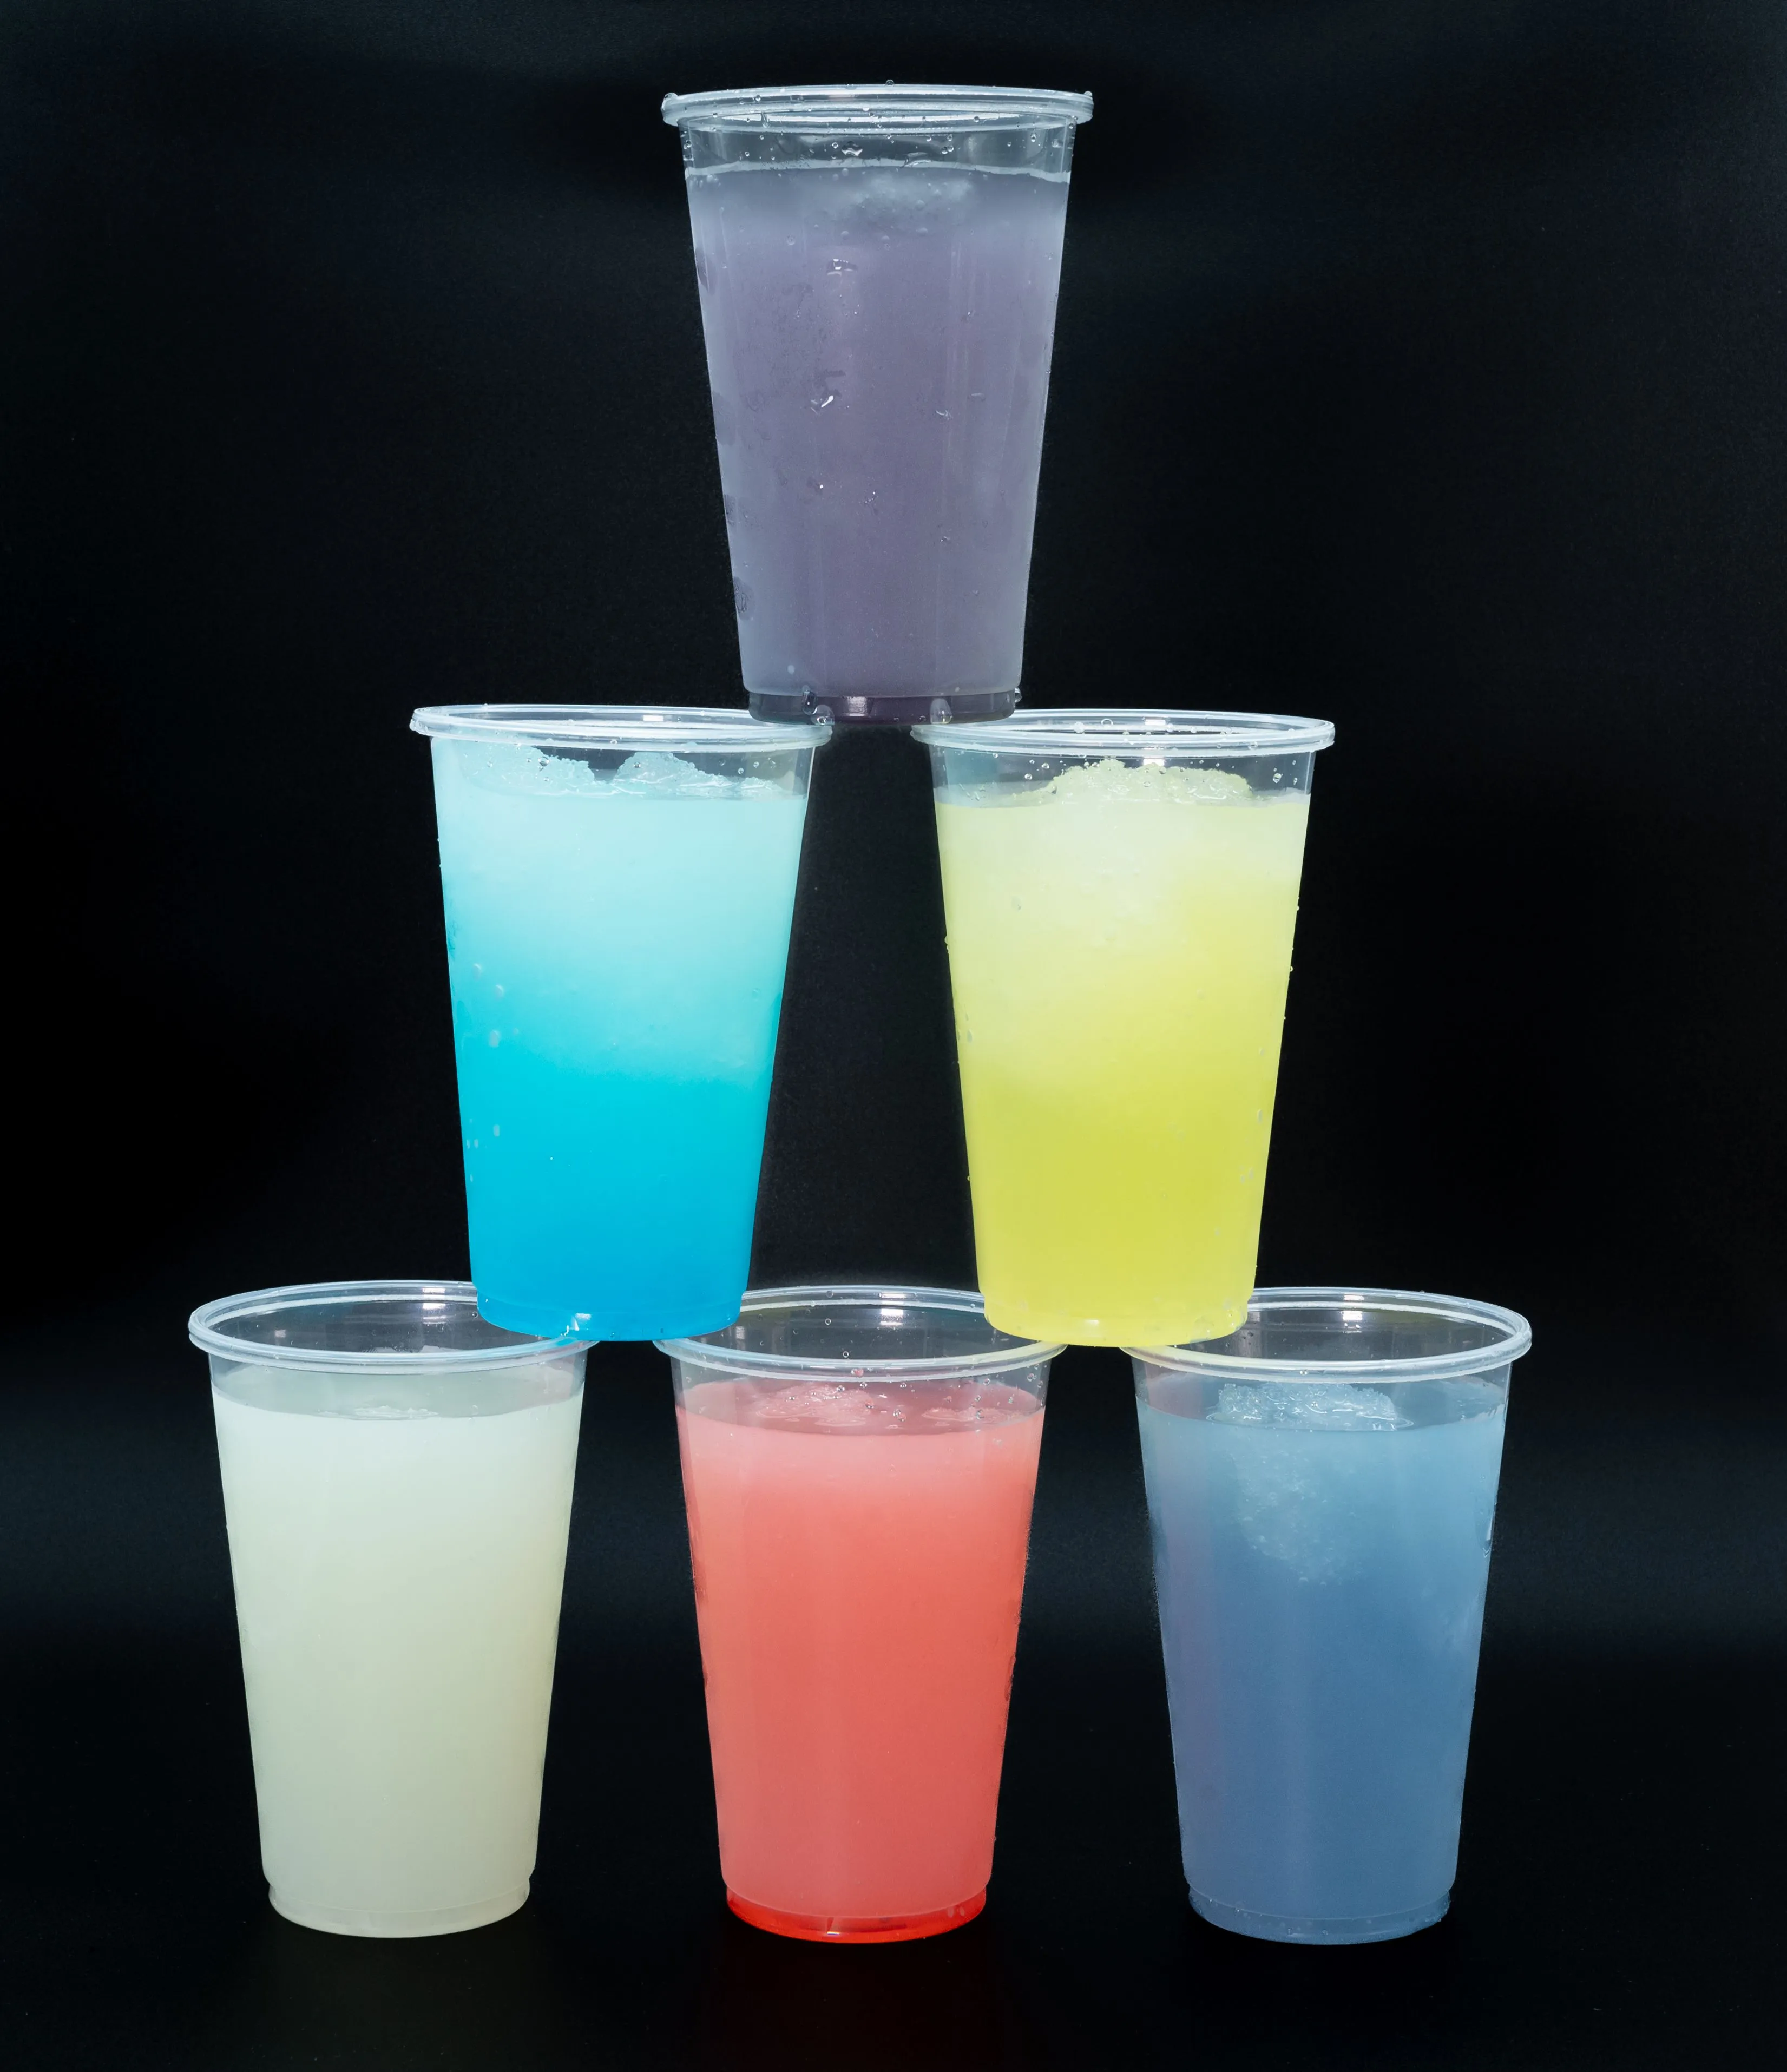 Five colorful frozen drinks in clear plastic cups stacked in a pyramid formation on a black background.